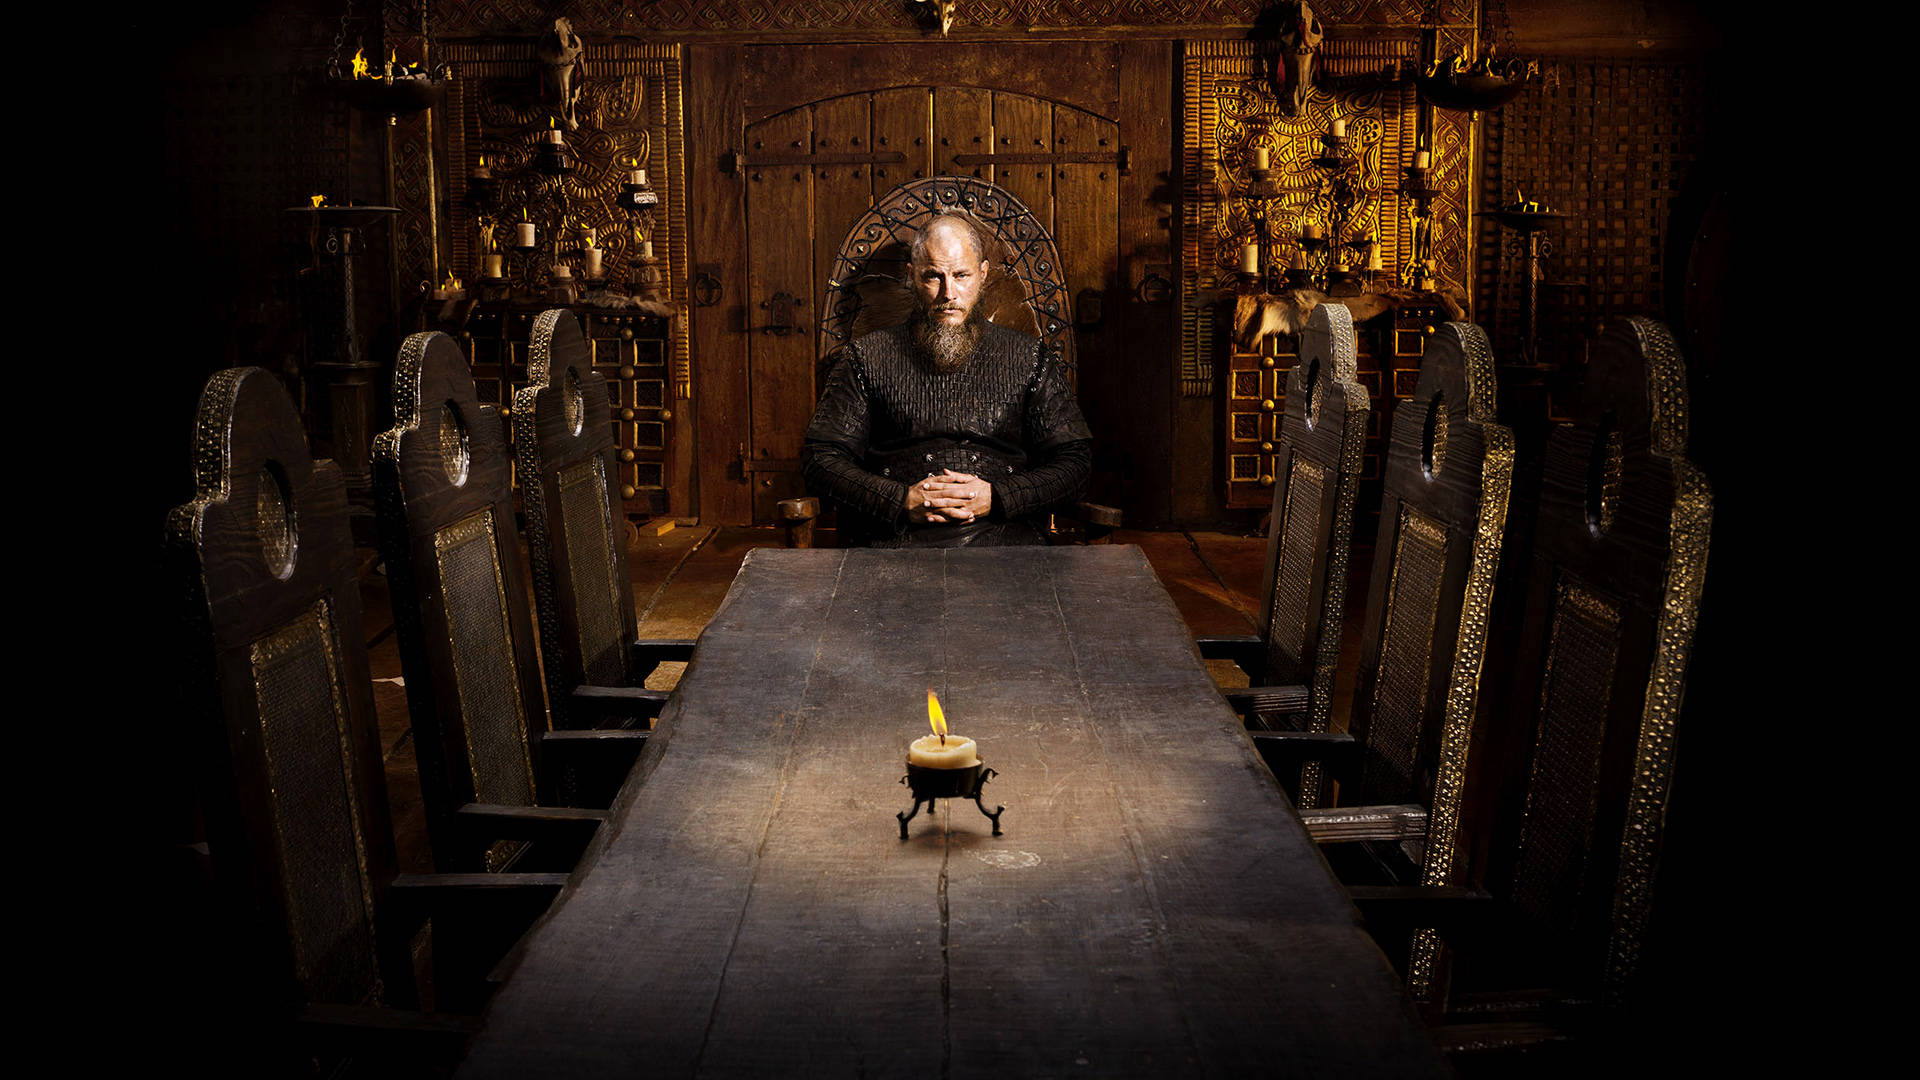 Vikingakungenragnar Sitter Ensam - As A Native Swedish Speaker, I Would Suggest Using This Translation For A Computer Or Mobile Wallpaper Featuring The Image Of King Ragnar Sitting Alone. Wallpaper